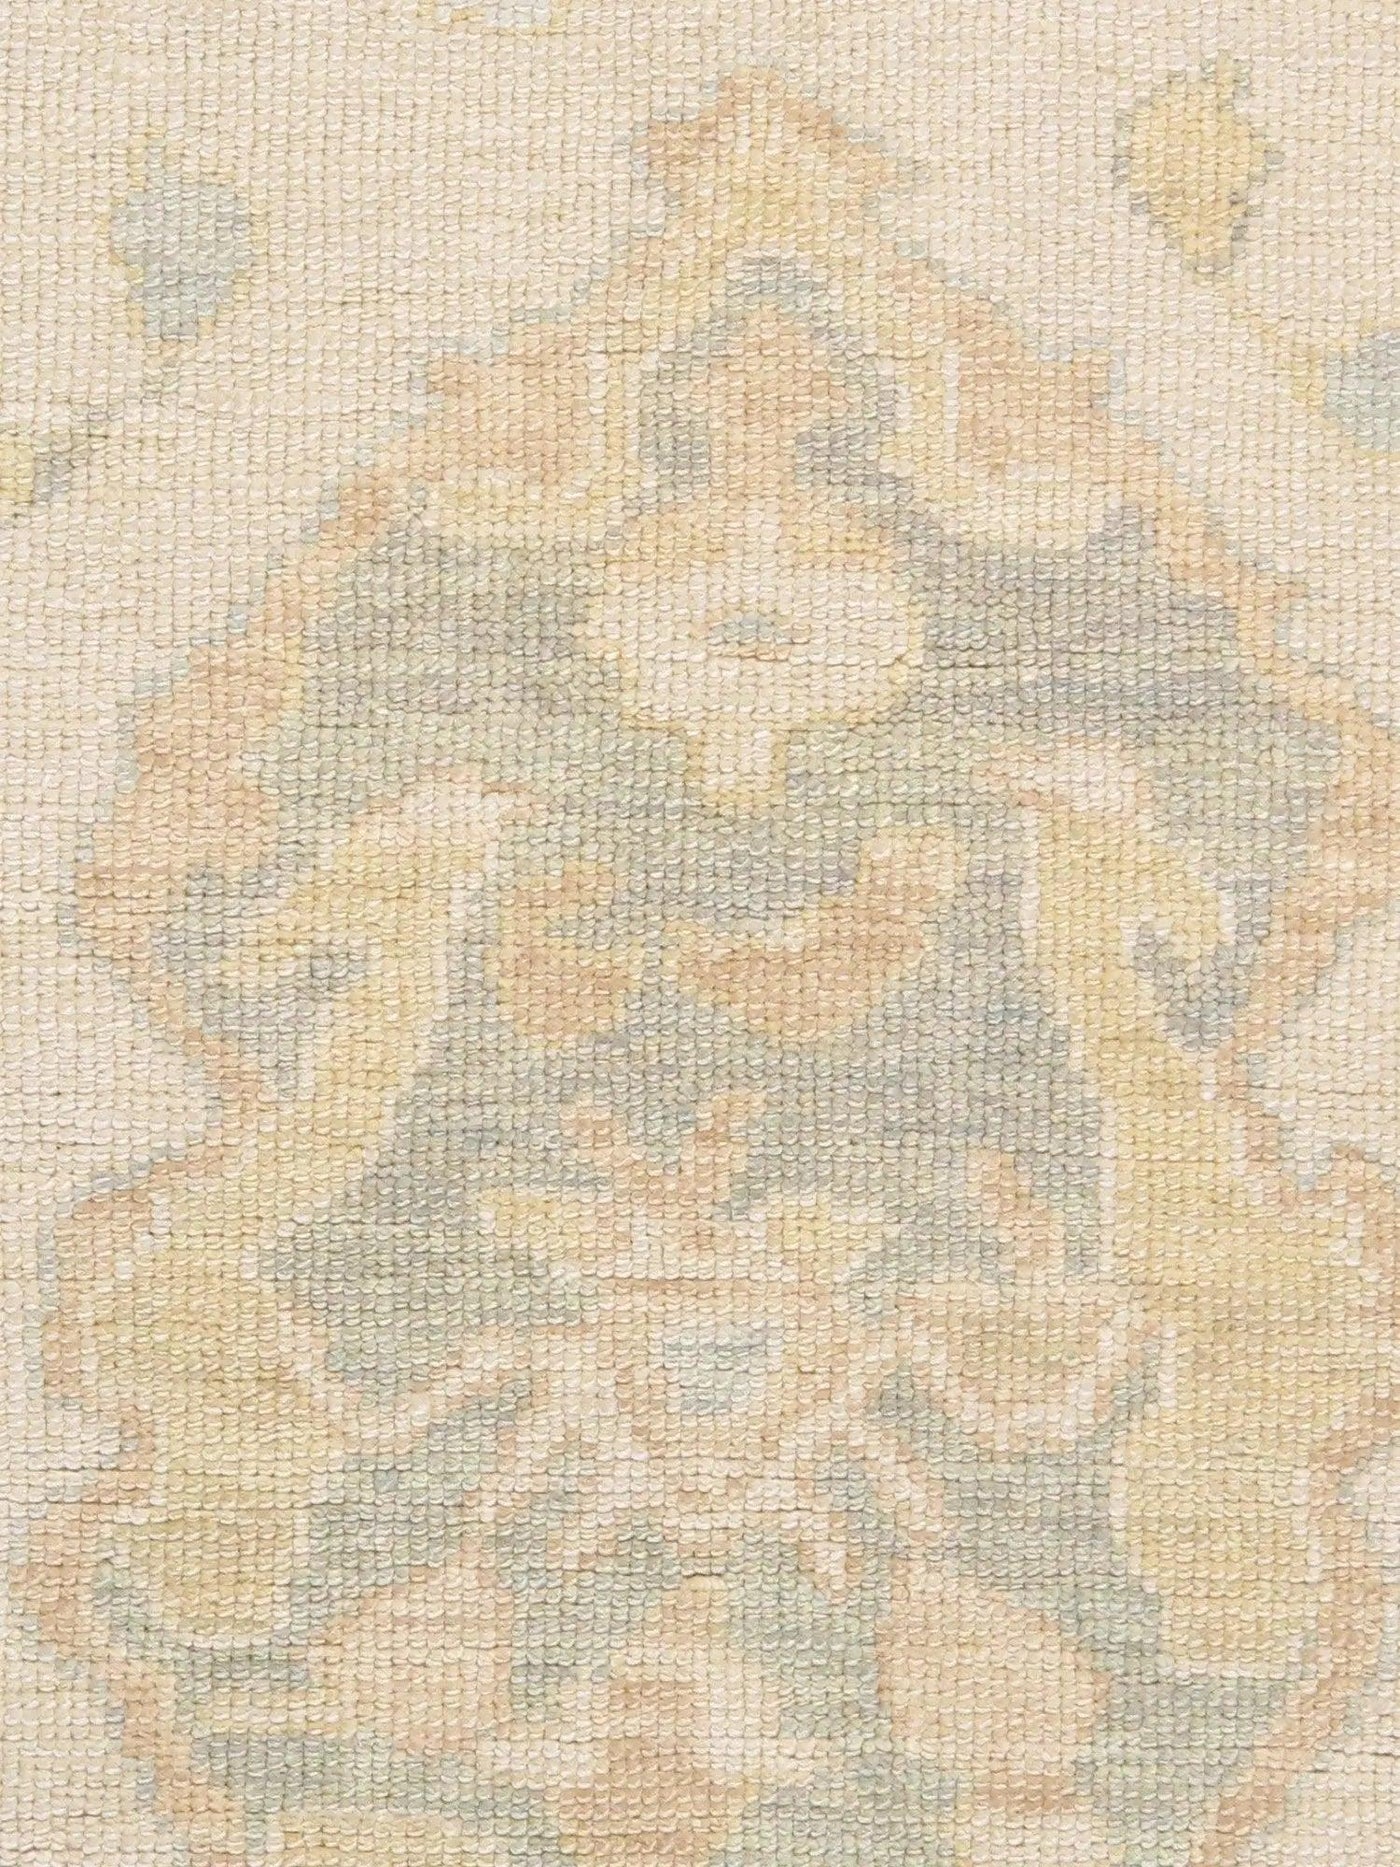 Canvello Oushak Lamb's Wool Area Rug- 12' X 16'5"